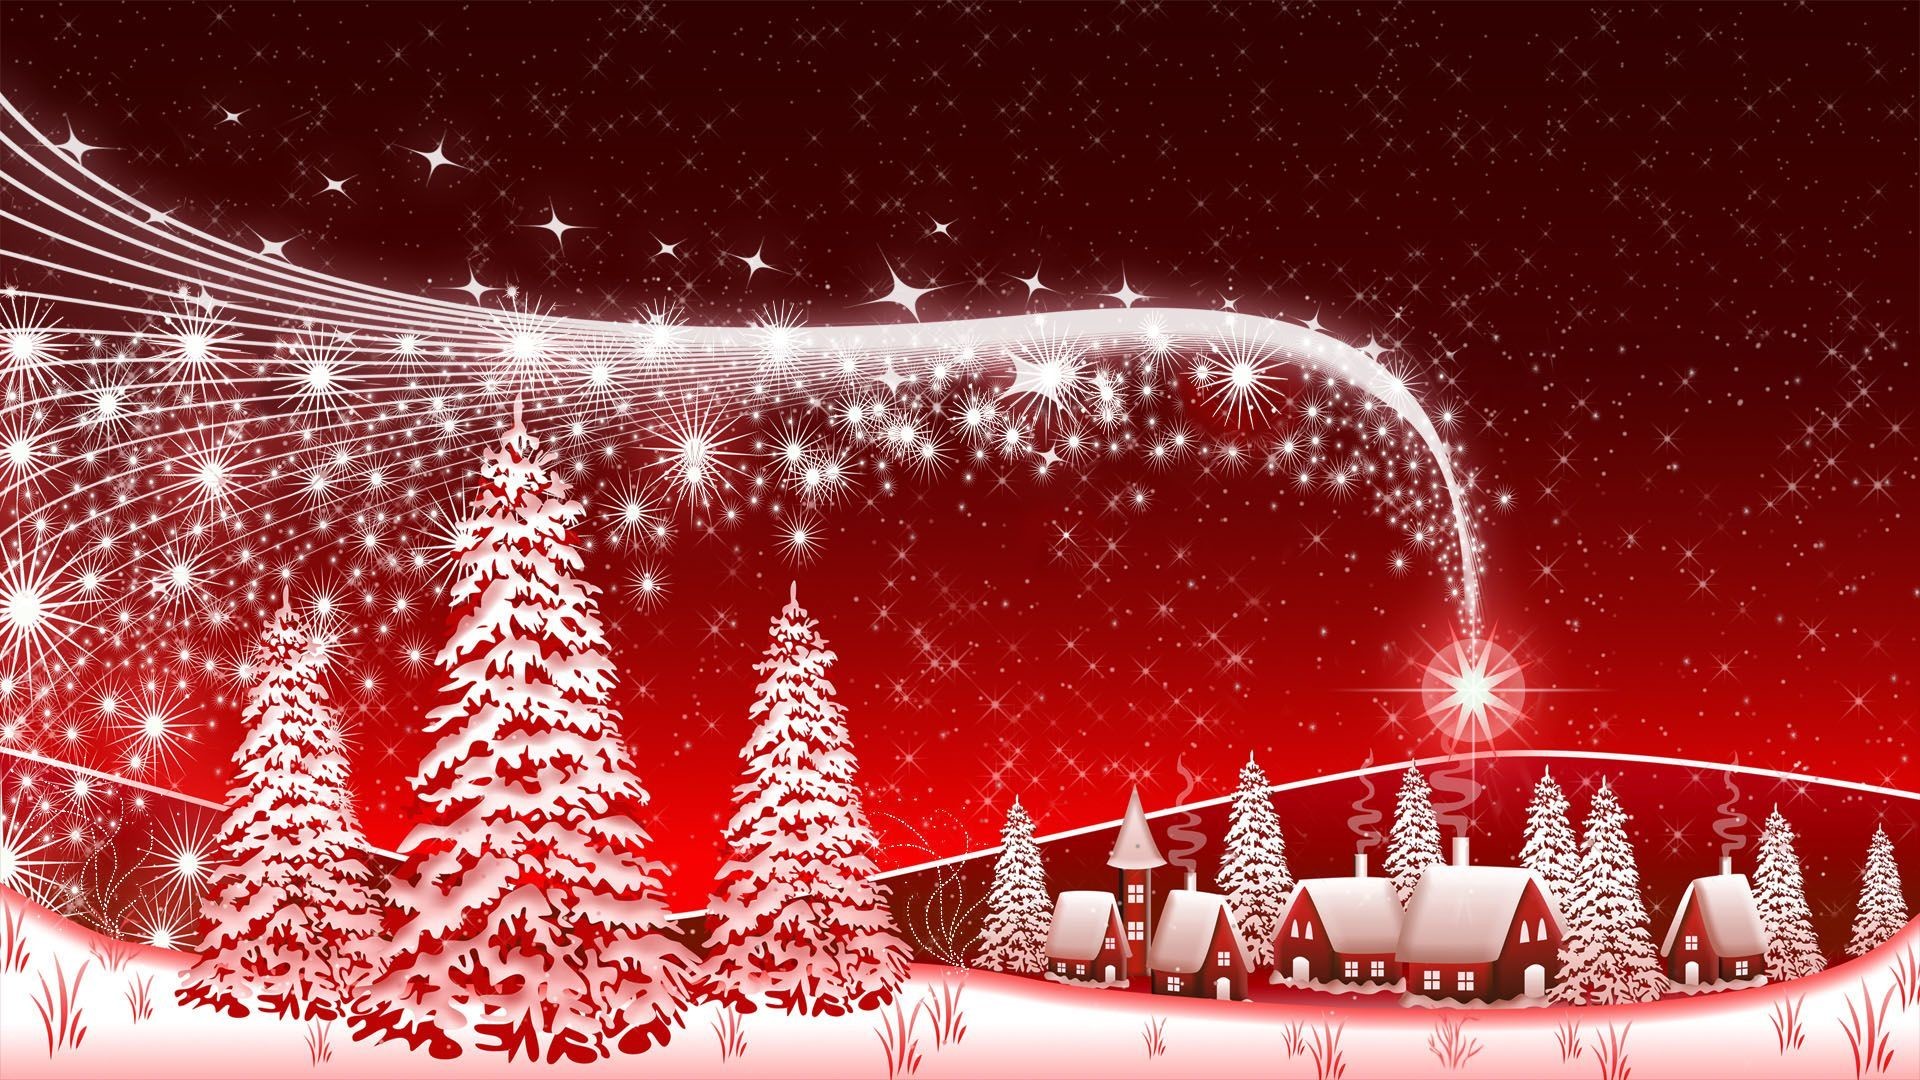 1920x1080 Winter Christmas Wallpapers High Quality Resolution